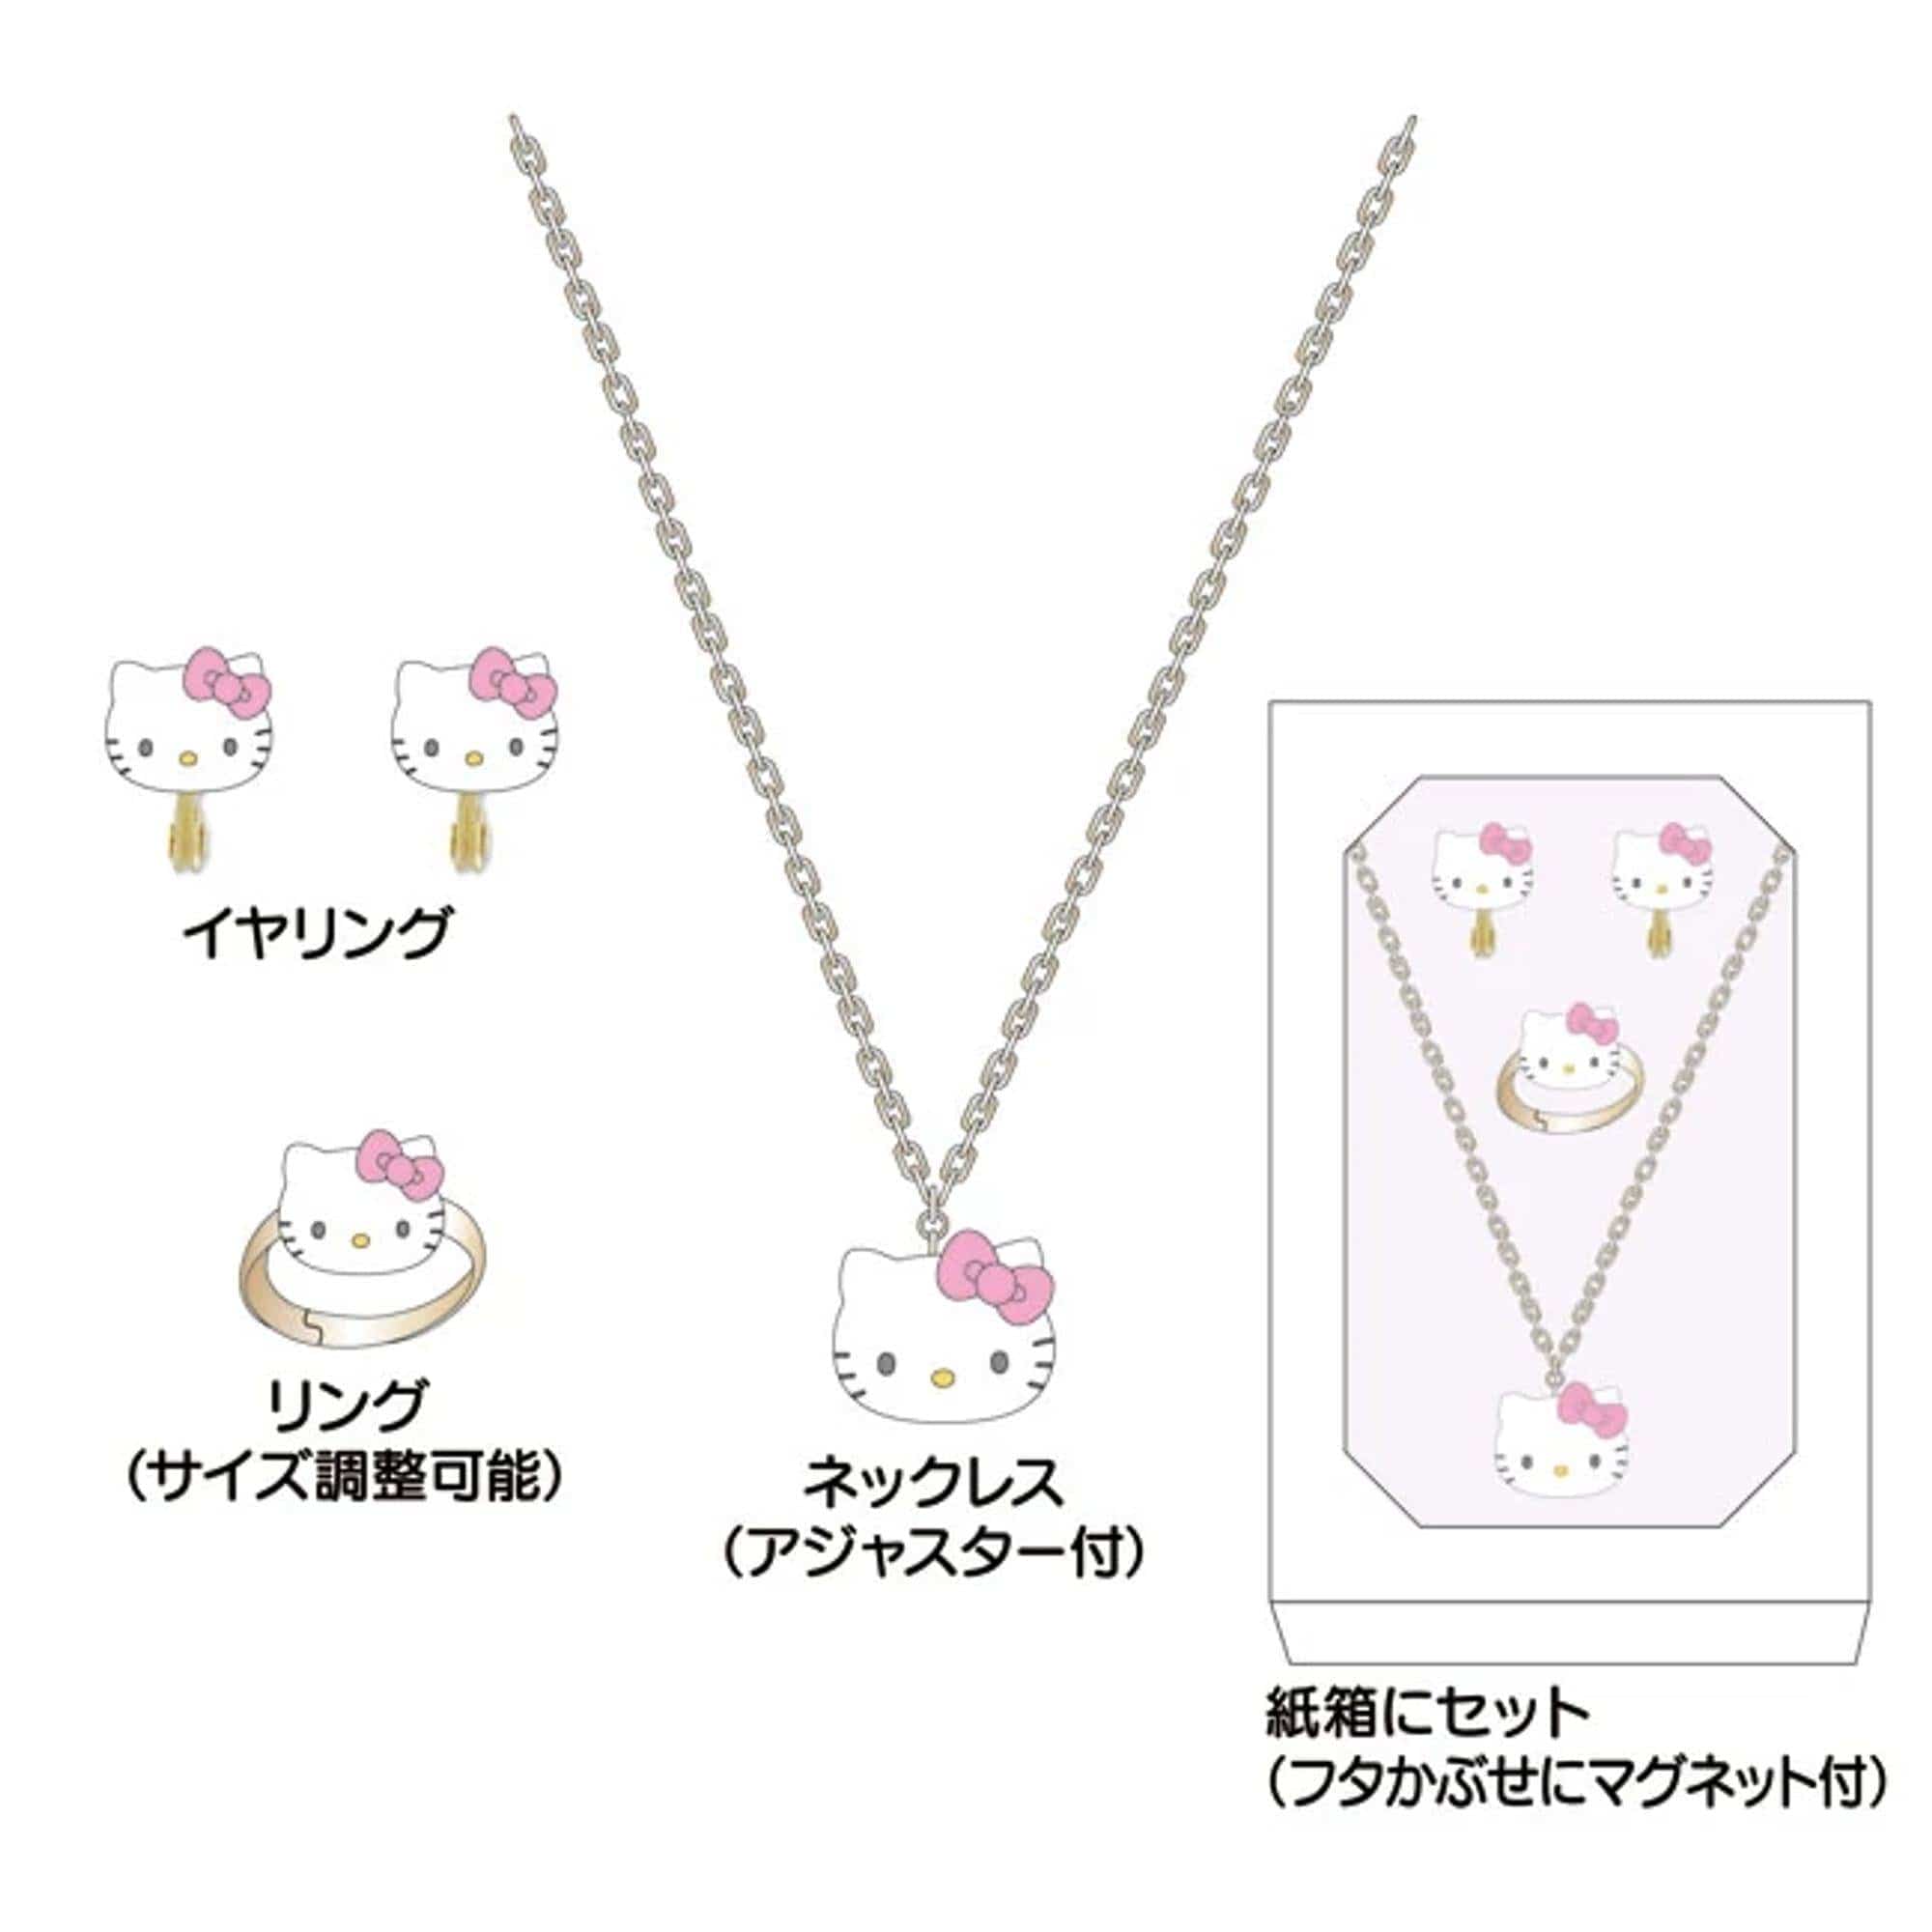 Sanrio Hello Kitty Girls Necklace and Bracelet with 12 Sanrio Charms  Customizable Advent Set - Officially Licensed